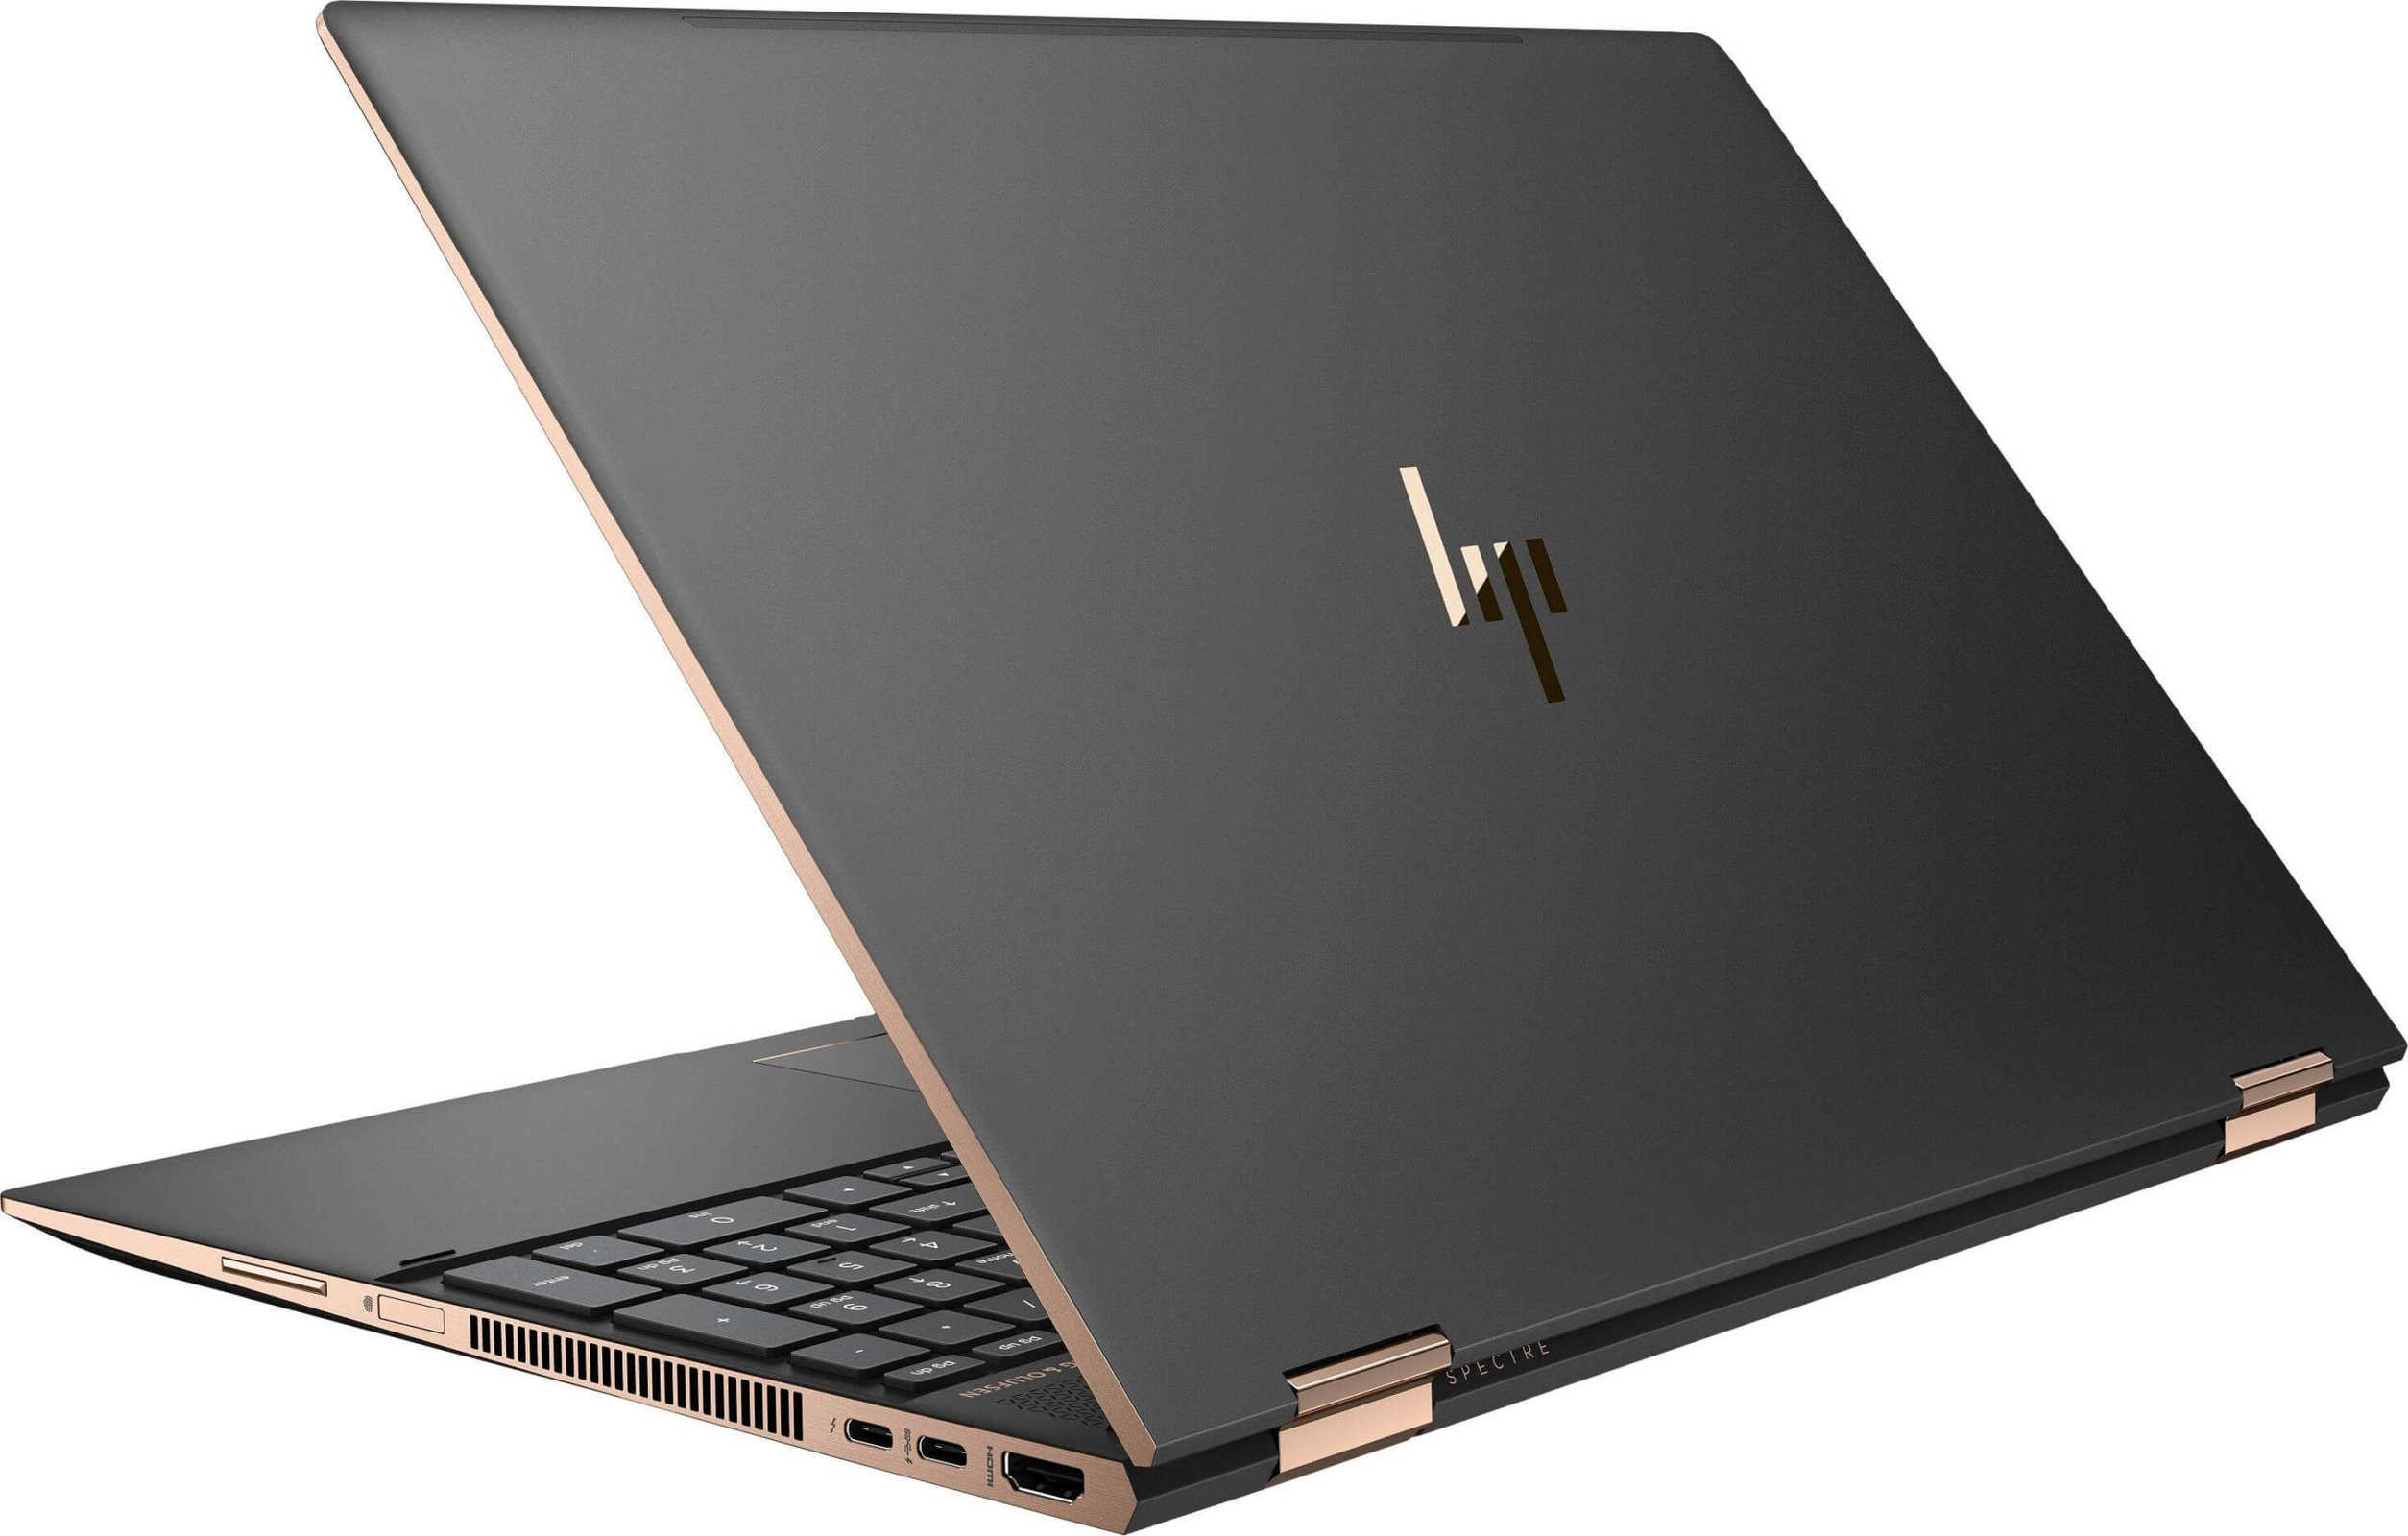 HP x360 review